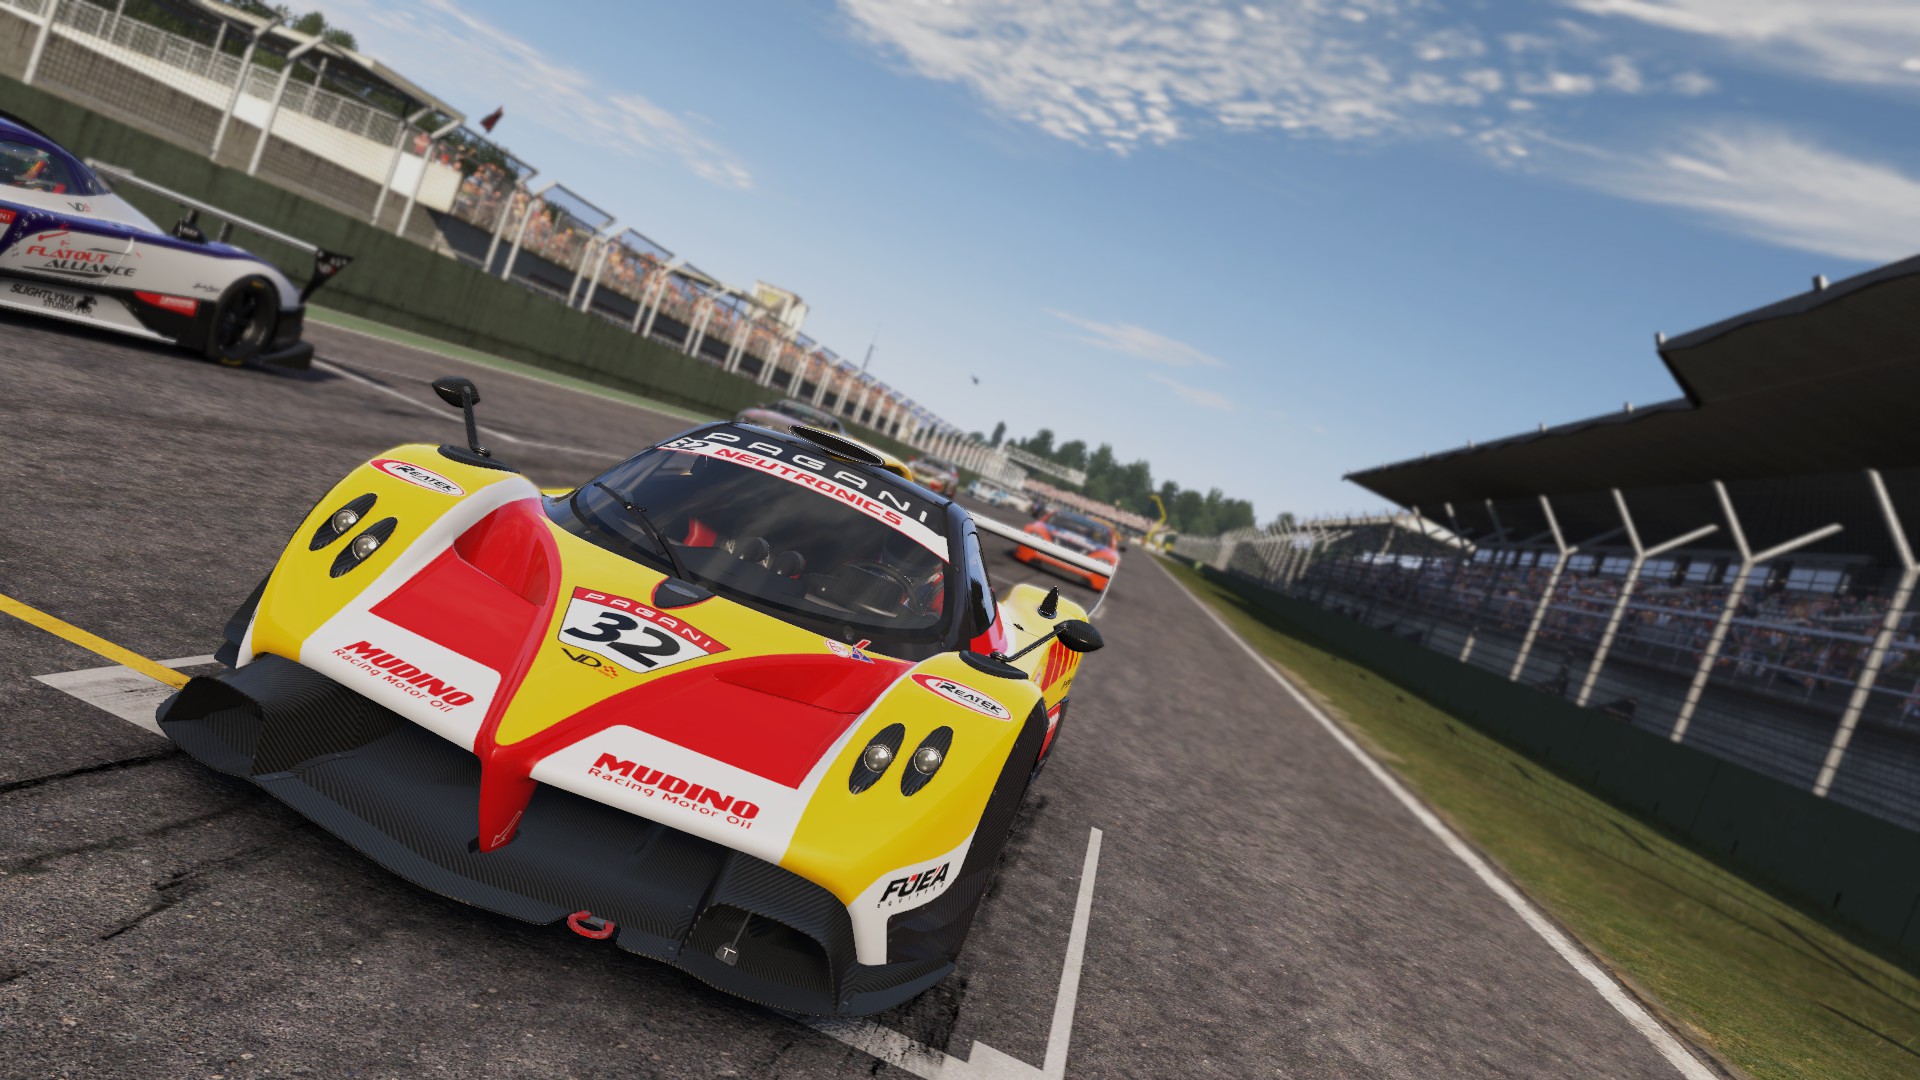 Игры project cars. Project cars 2015. Гонки 2014 года. Project cars геймплей. Project cars 2 геймплей.